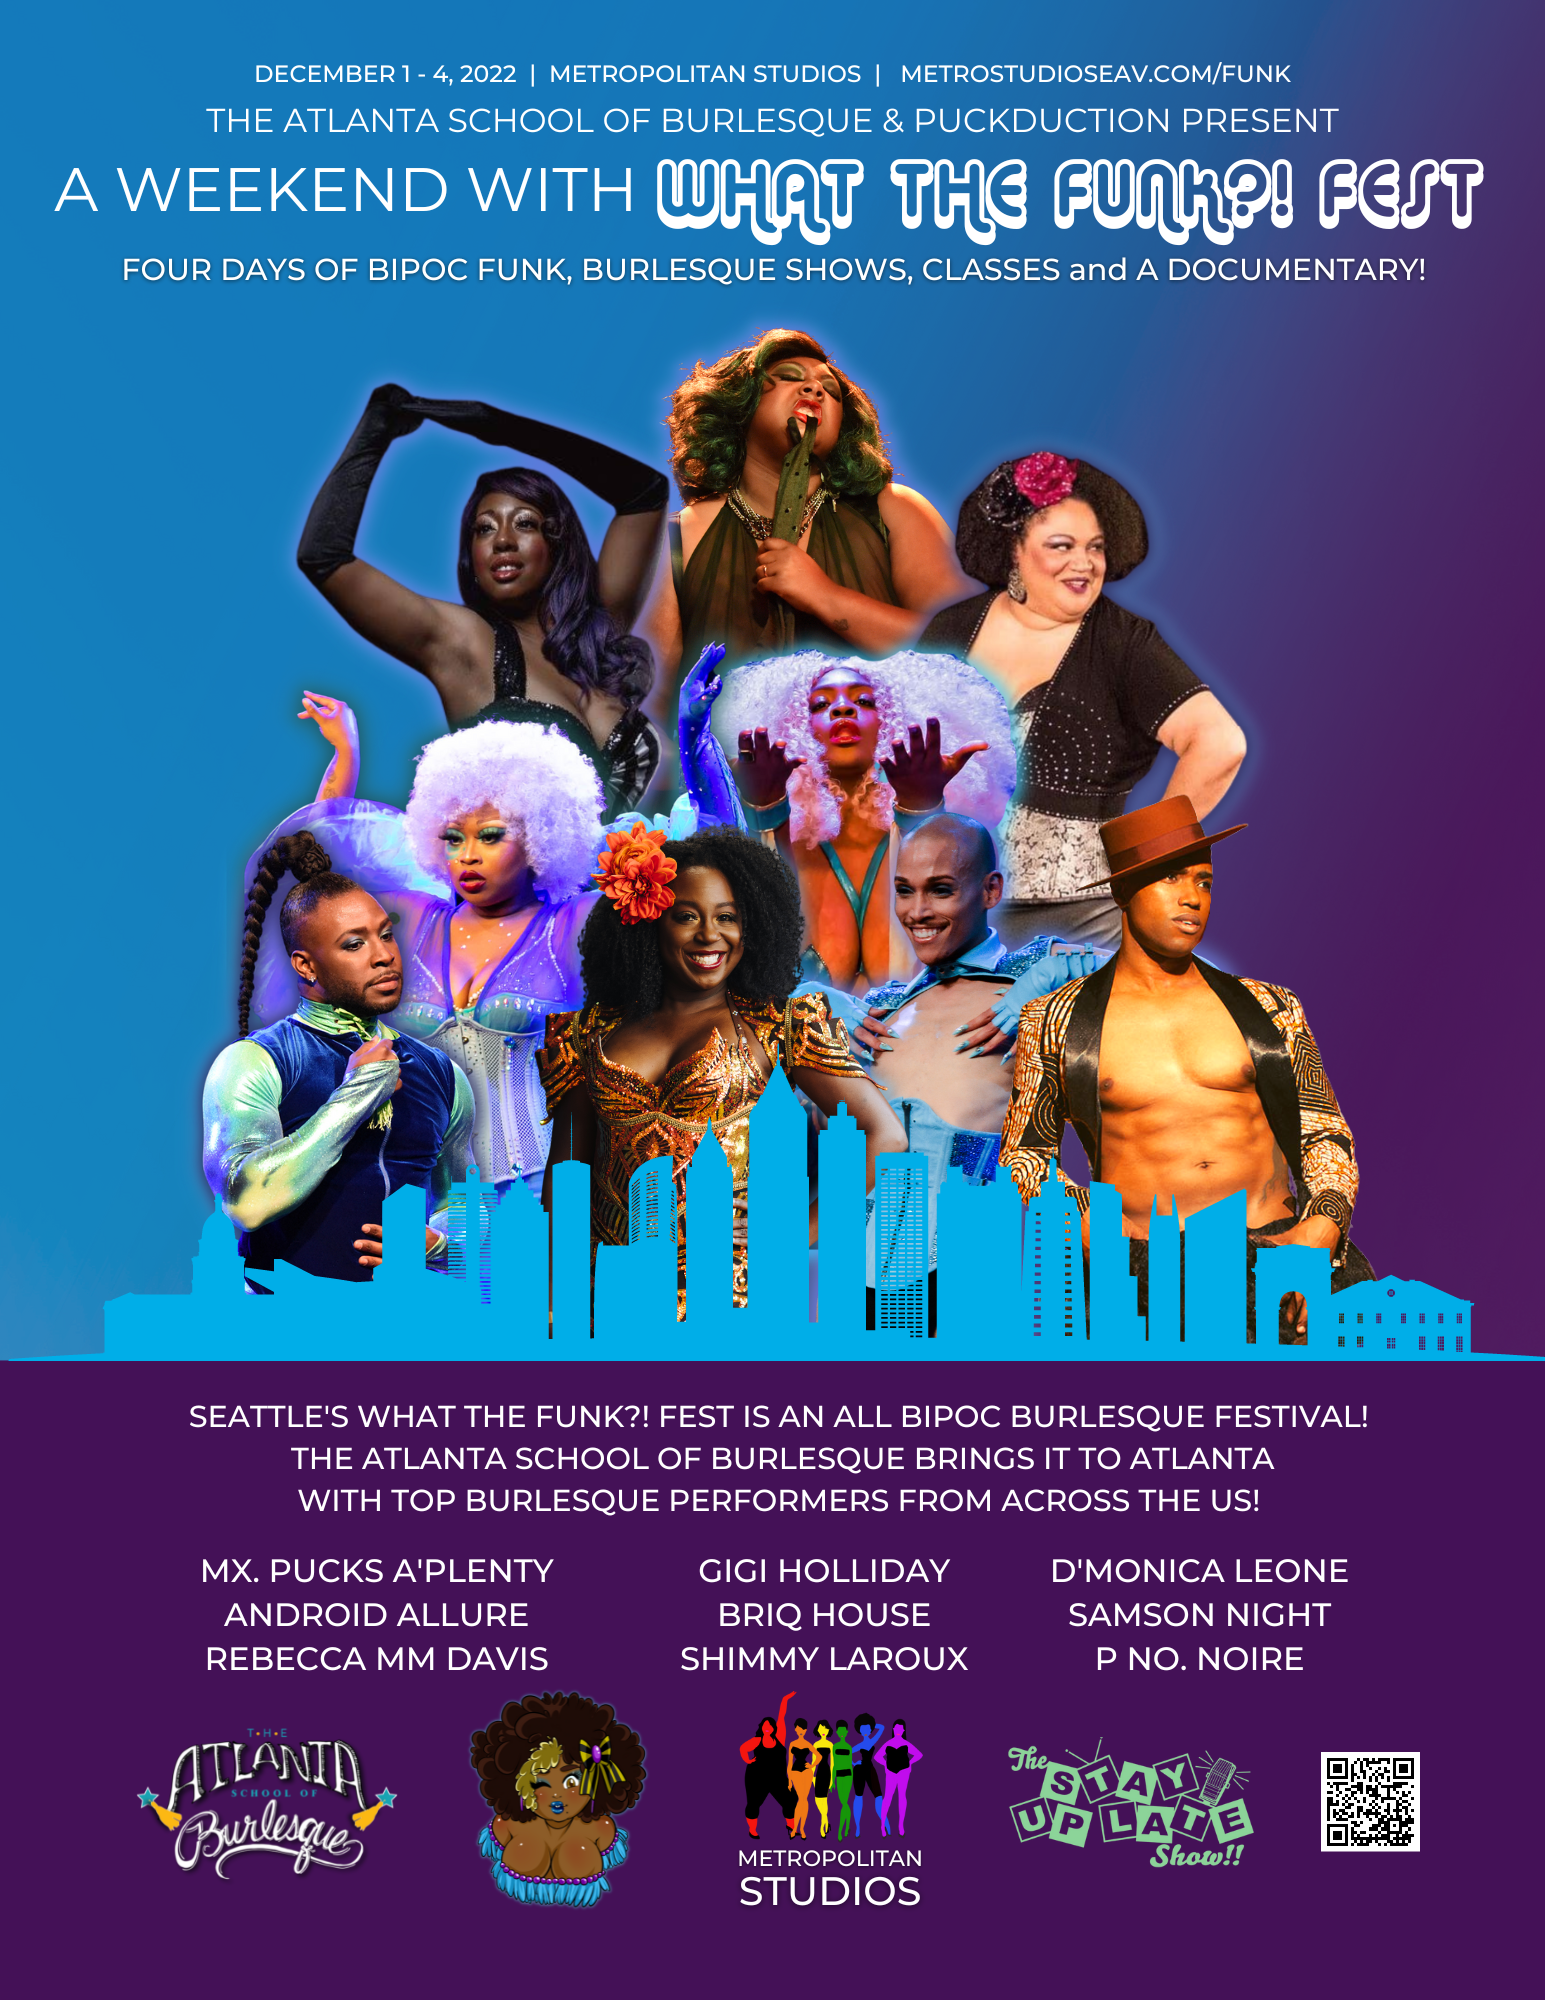 What the Funk?!; an All BIPOC Burlesque Festival Weekender Travels to Atlanta for a Weekend Celebrating Funk This December